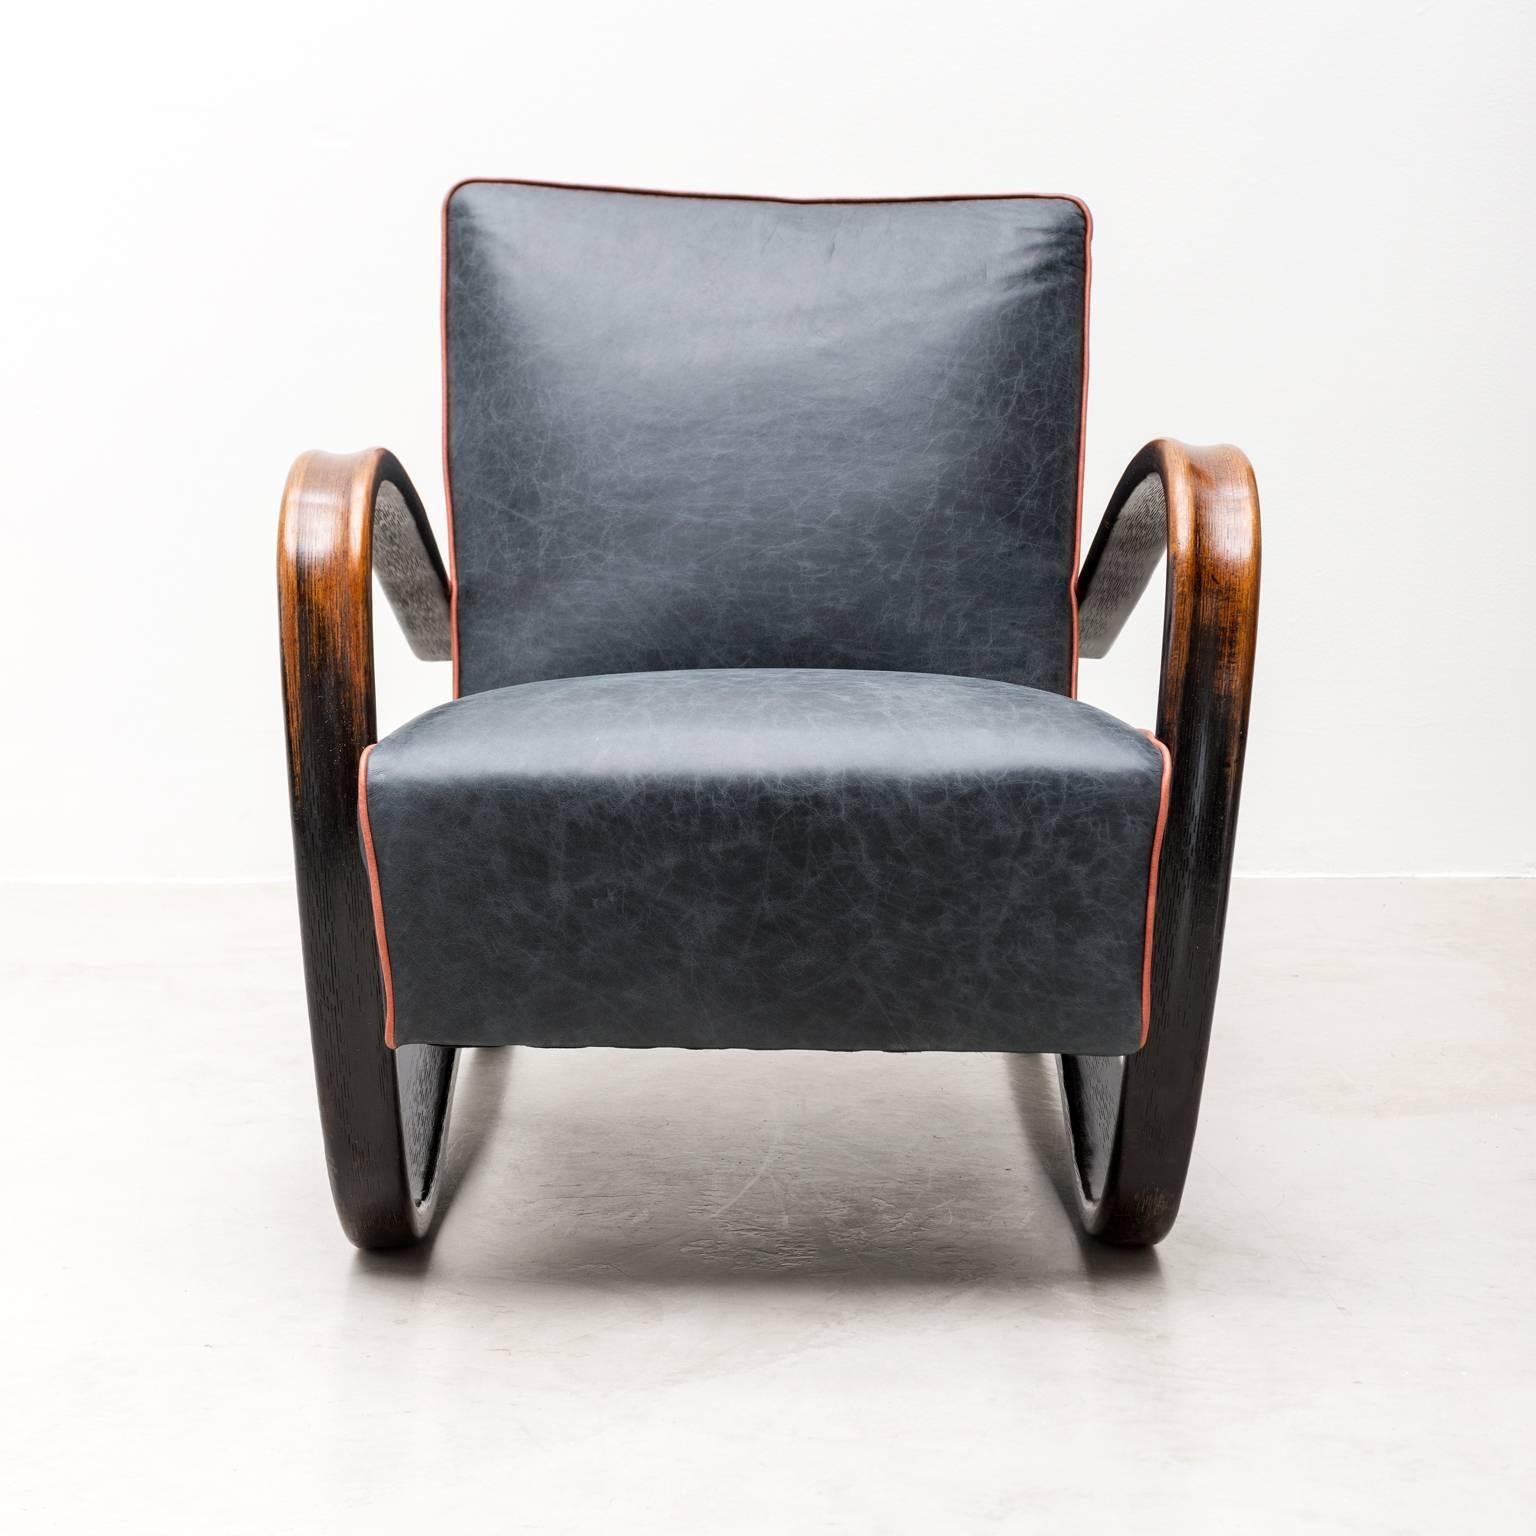 A stunning pair of model H269 chairs by Jindrich Halabala. These chairs retain their original patina on the beech ebonized arms, which has been enhanced by a French polish technique. They have been stripped to their seagrass and springs and